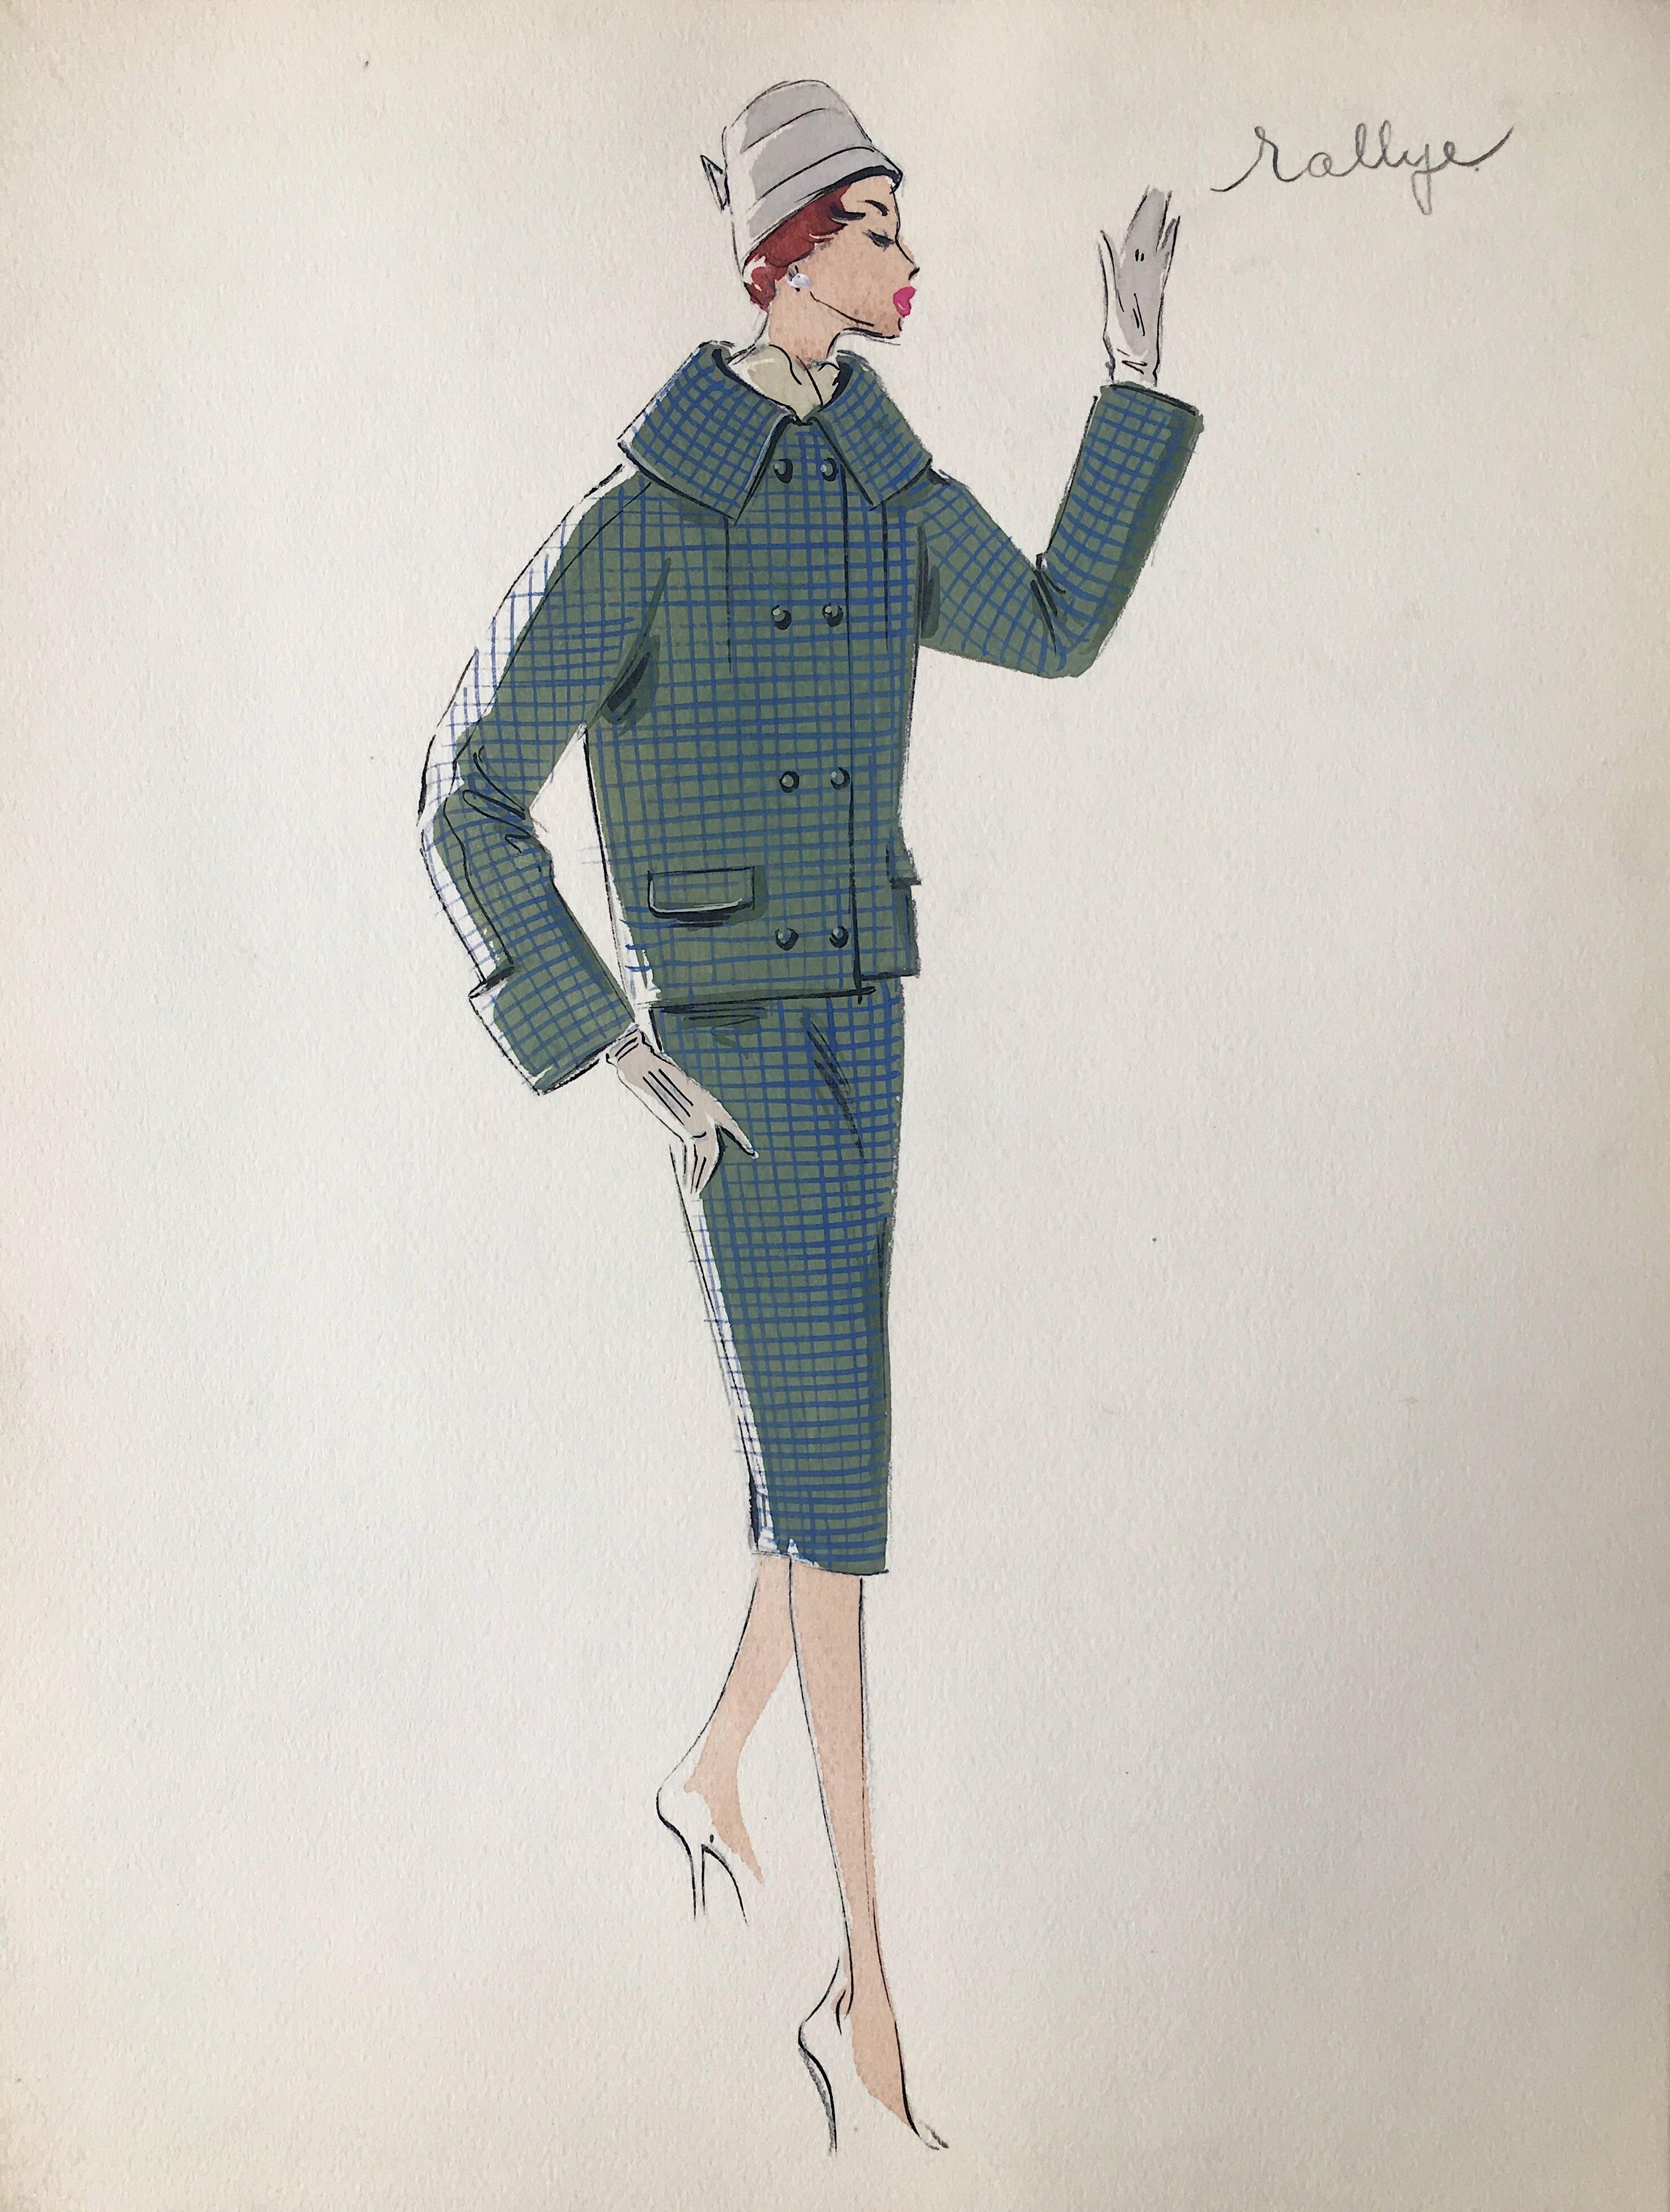 Unknown Portrait - Lady in Teal Two Piece 1950's Parisian Fashion Illustration Sketch